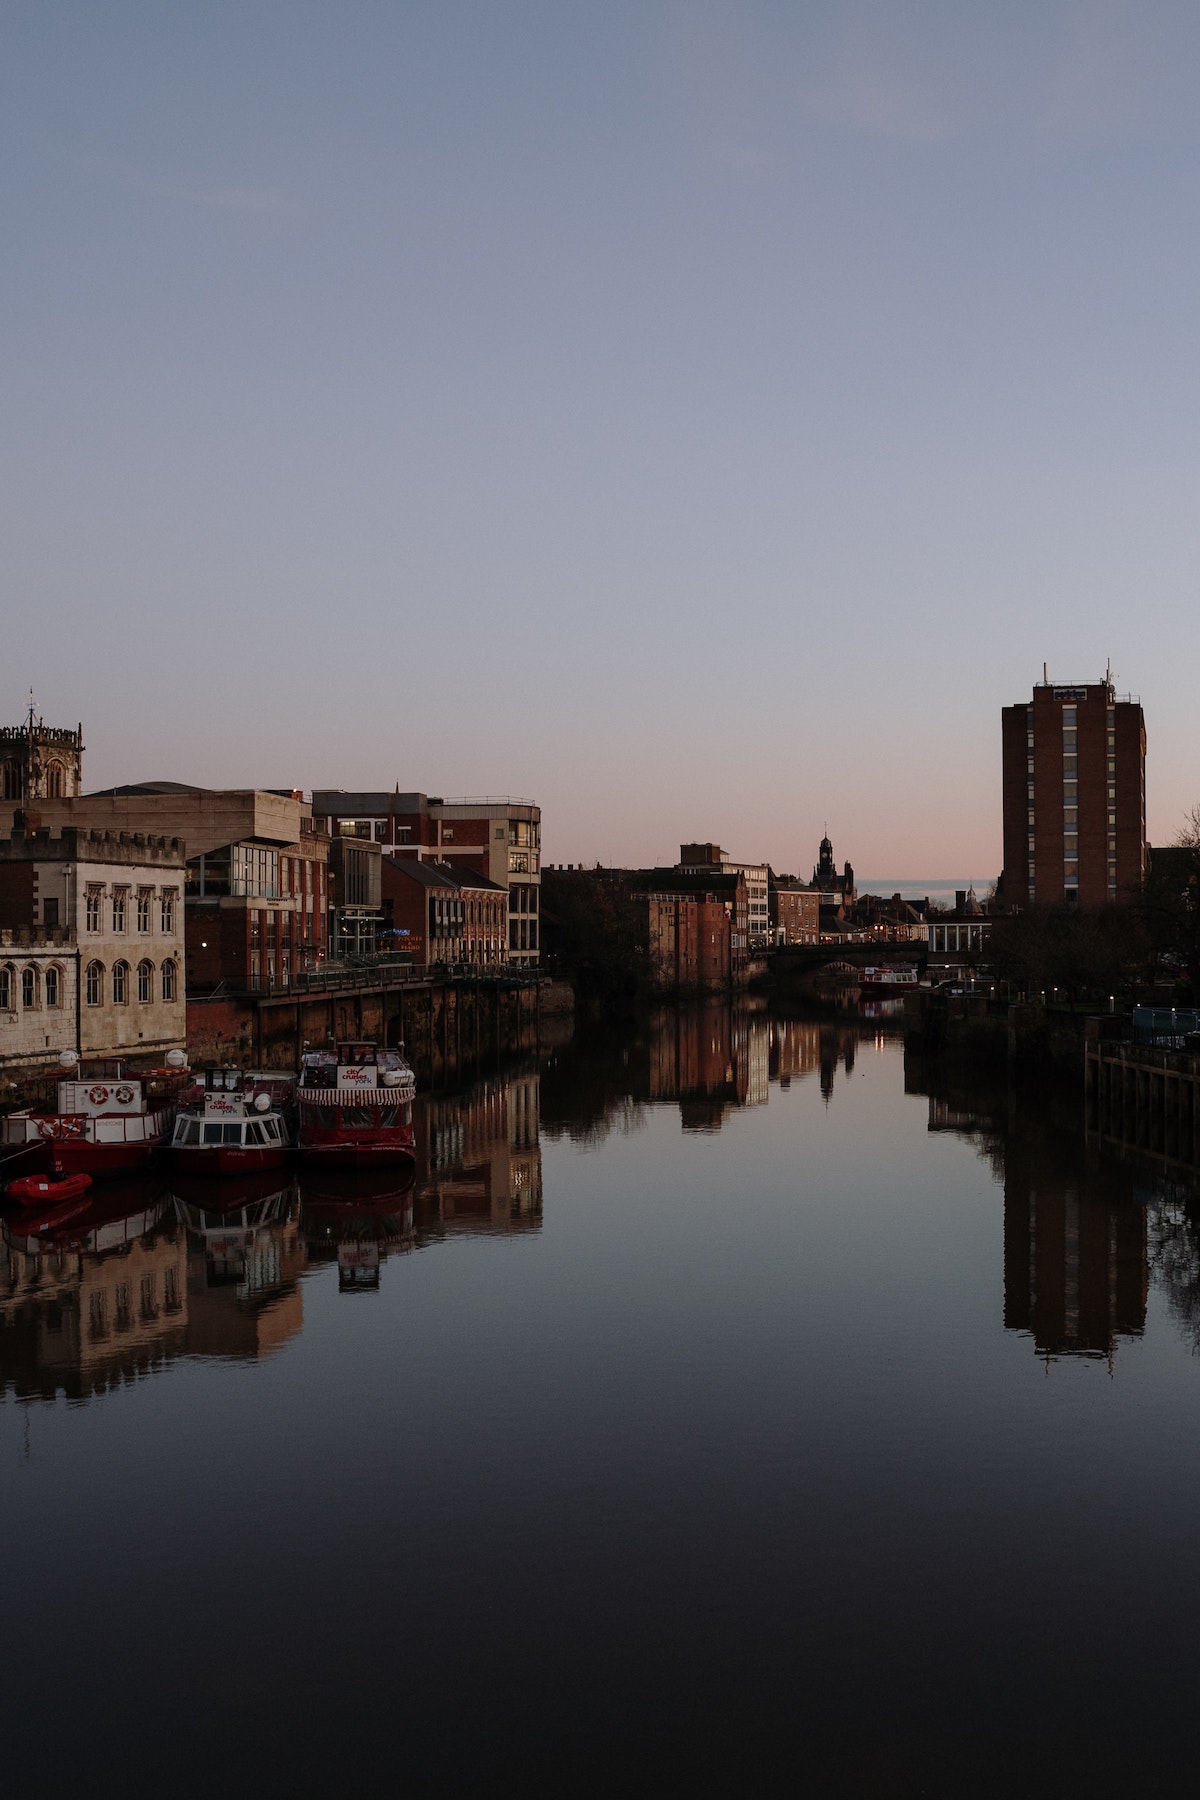 A body of water in a city with the reflections of the buildings shown on the water as the sun sets.